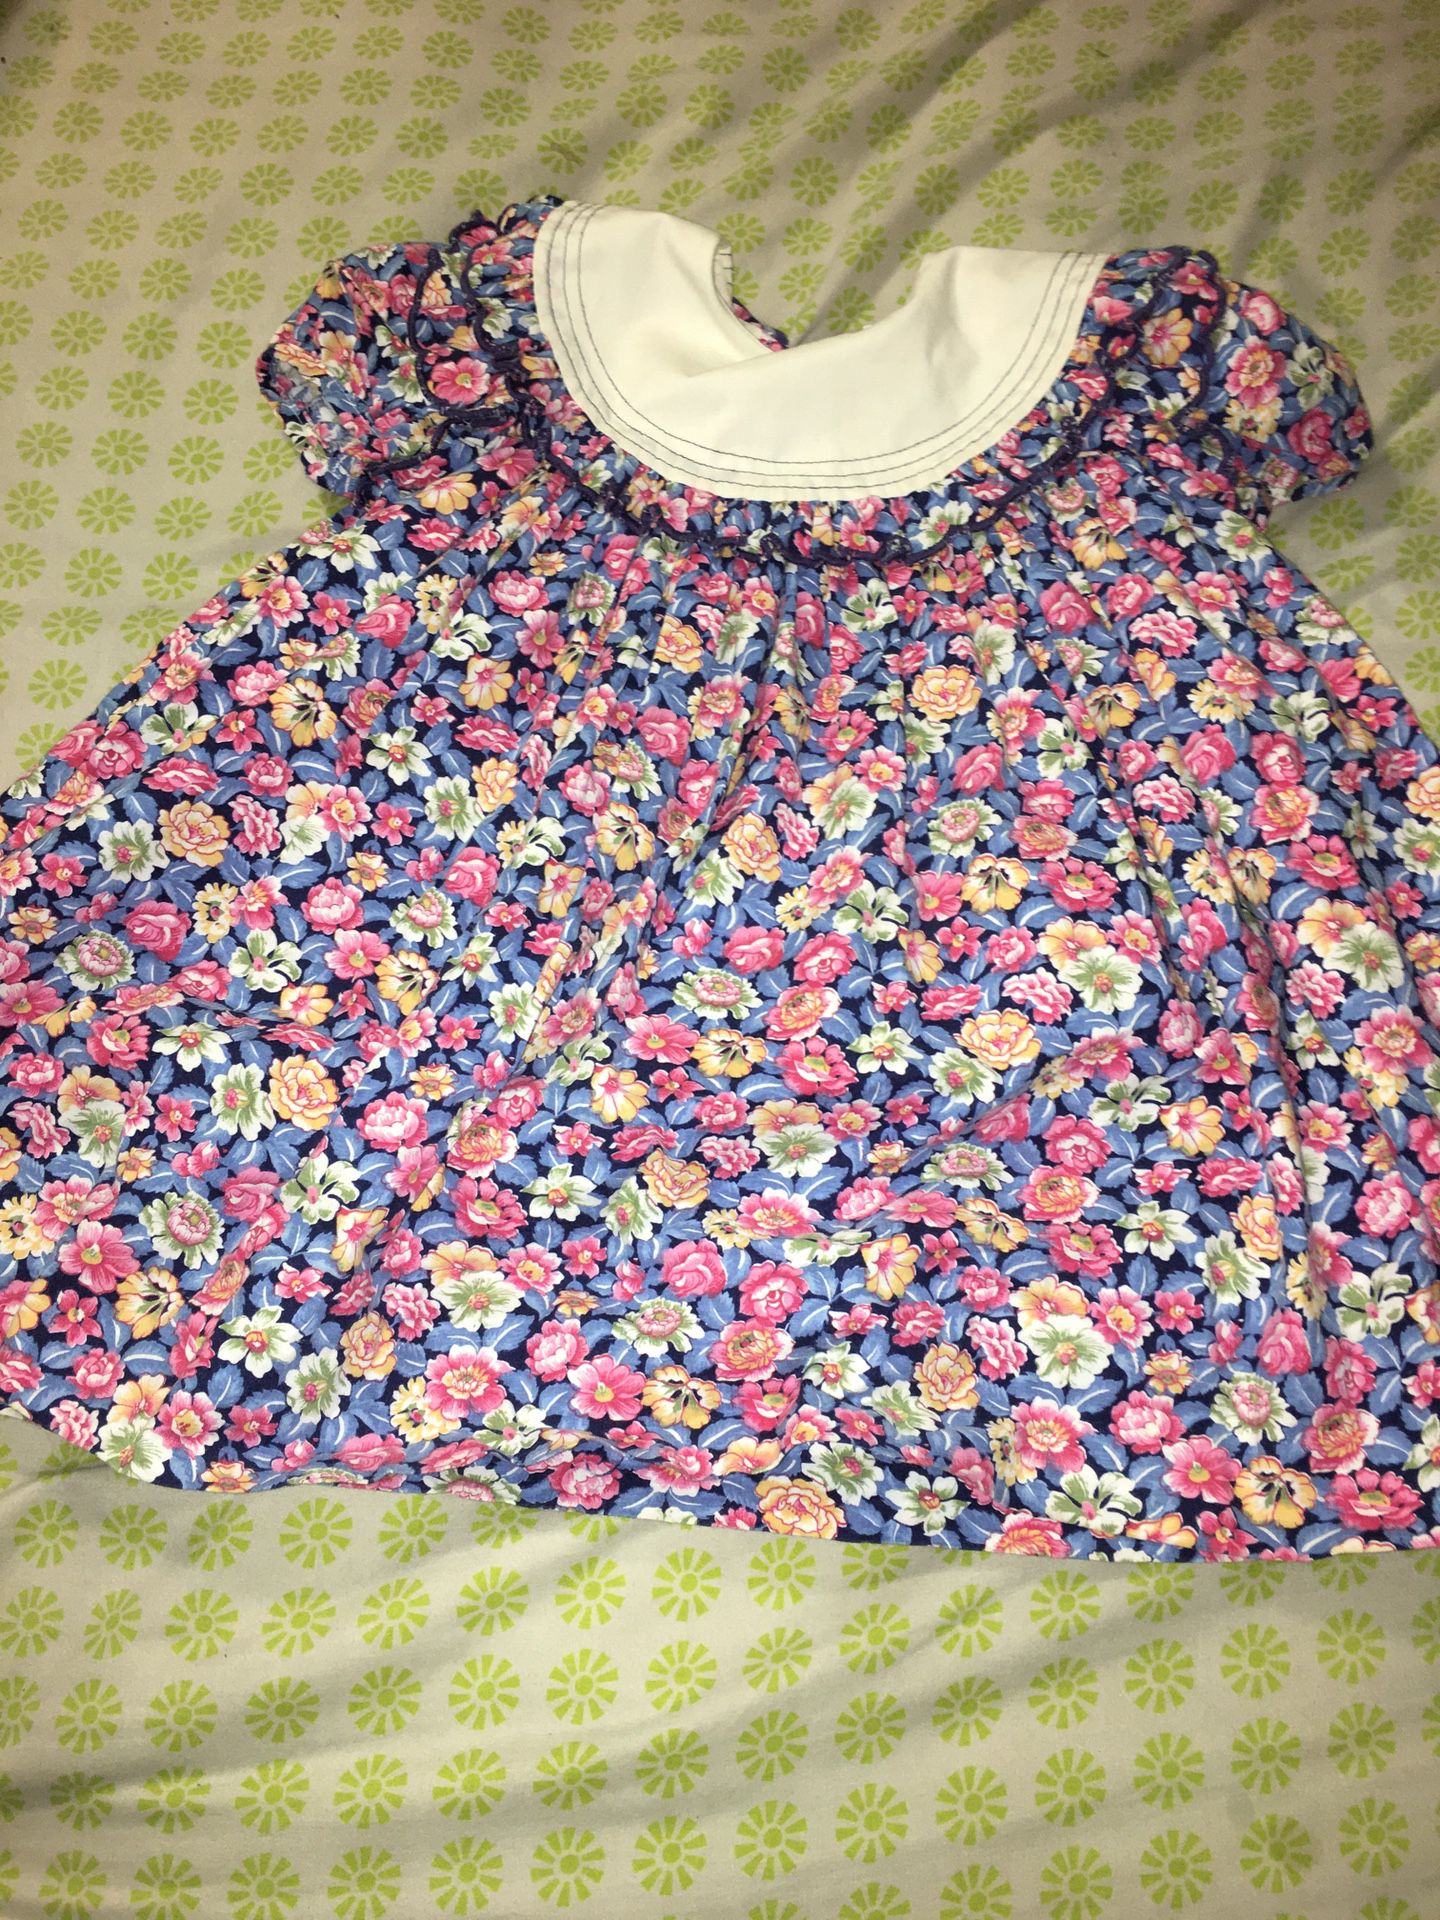 Vintage Polly Flinders Girls Dress Size 4 Blue with Pink, White, and Orange Flowers